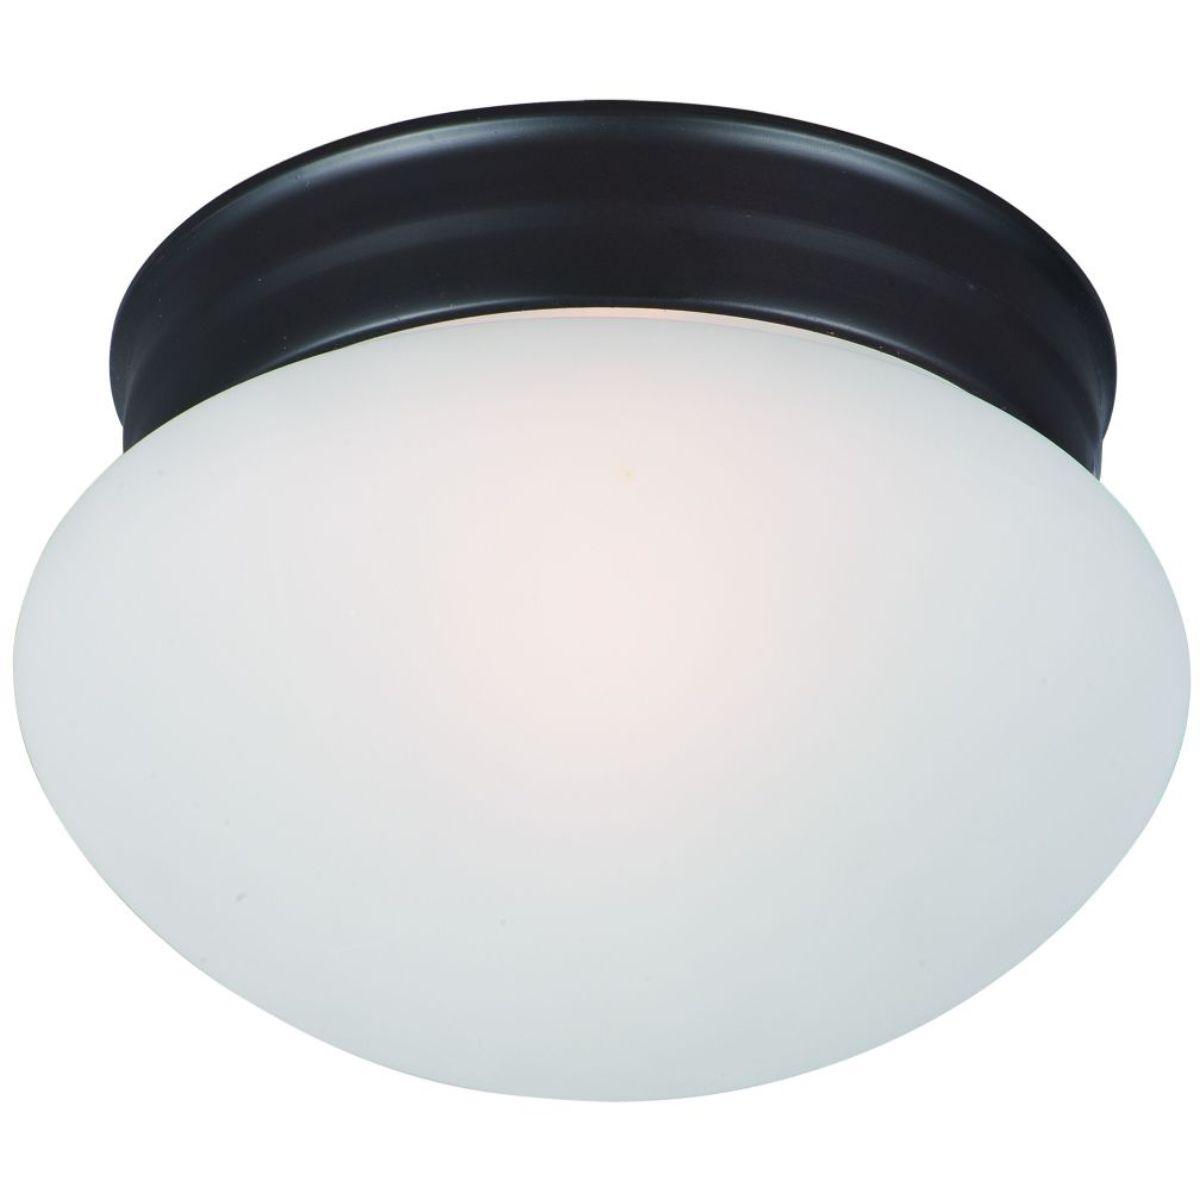 Essentials-588x 8 in. Ceiling Puff Light with frosted glass